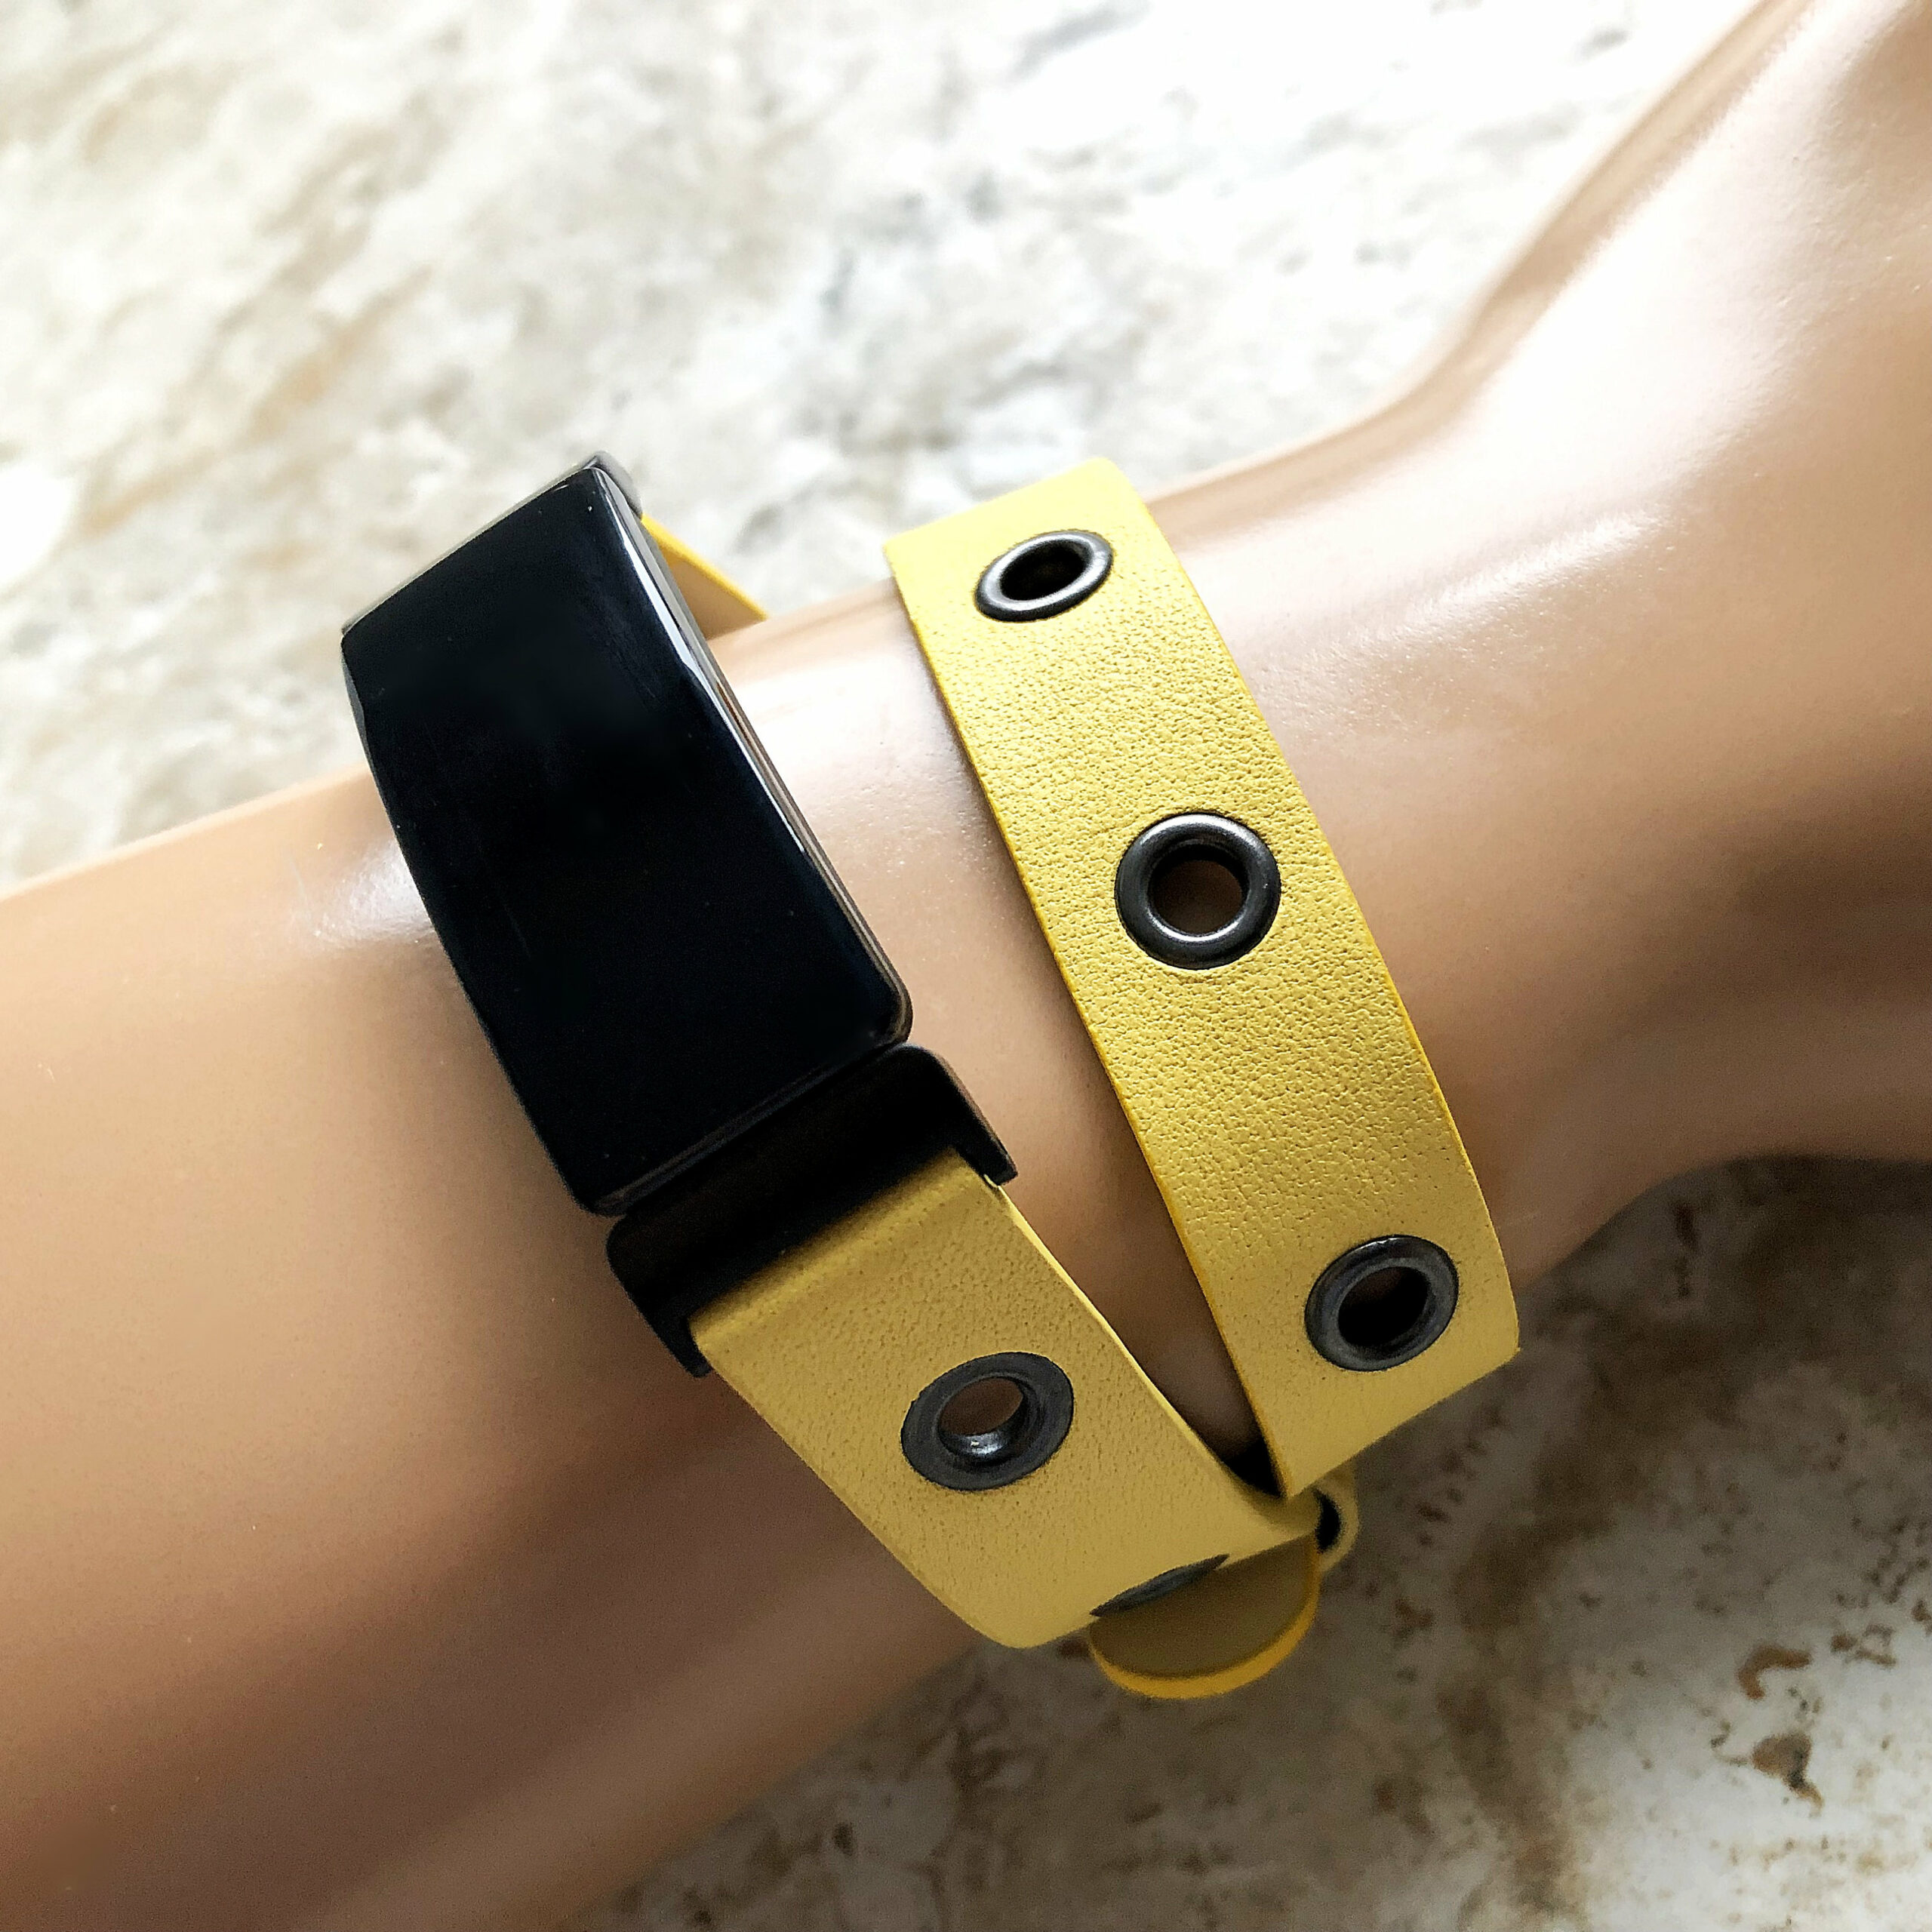 yellow fitbit band